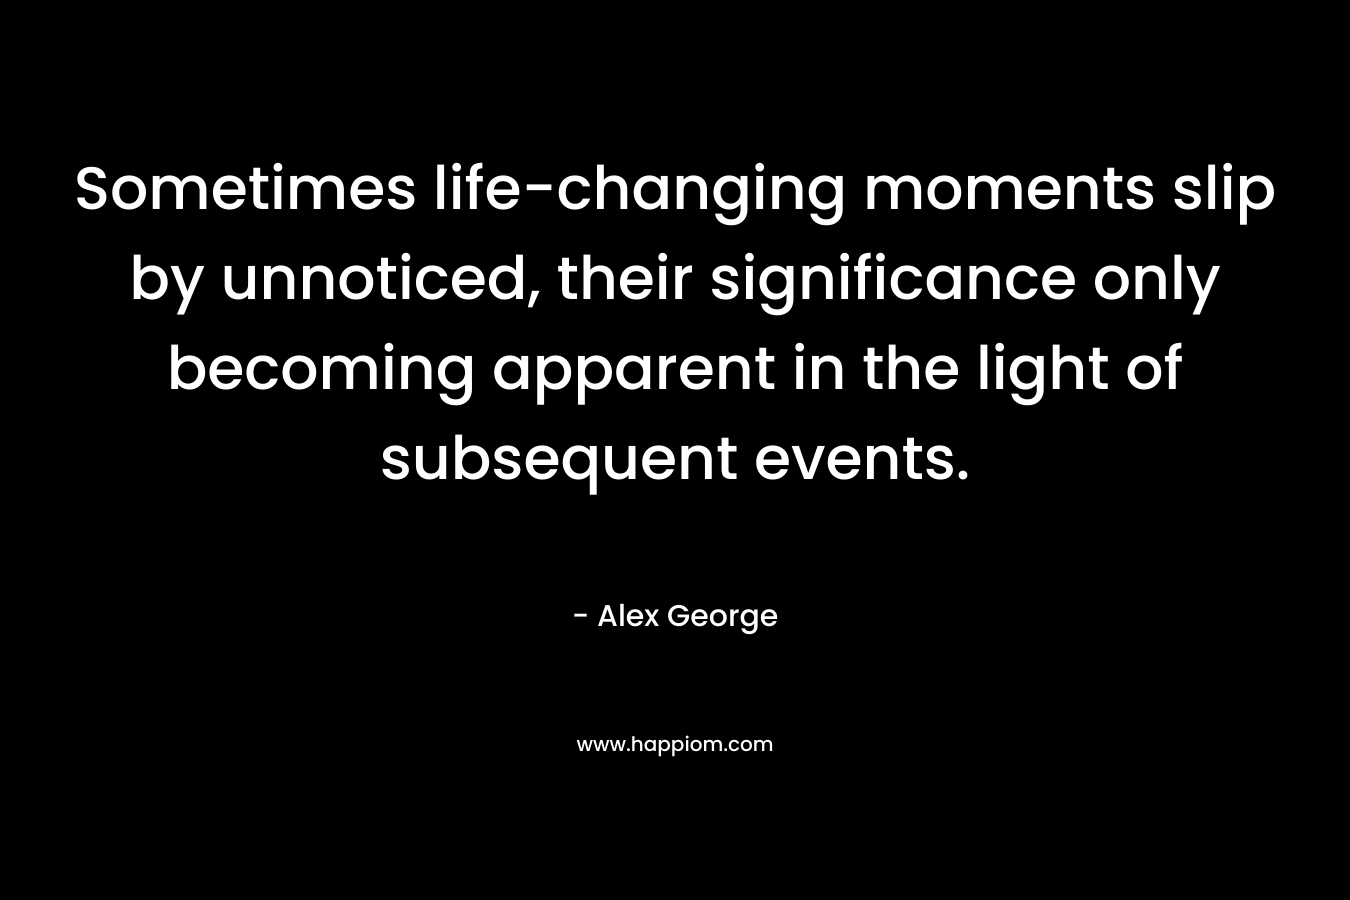 Sometimes life-changing moments slip by unnoticed, their significance only becoming apparent in the light of subsequent events.